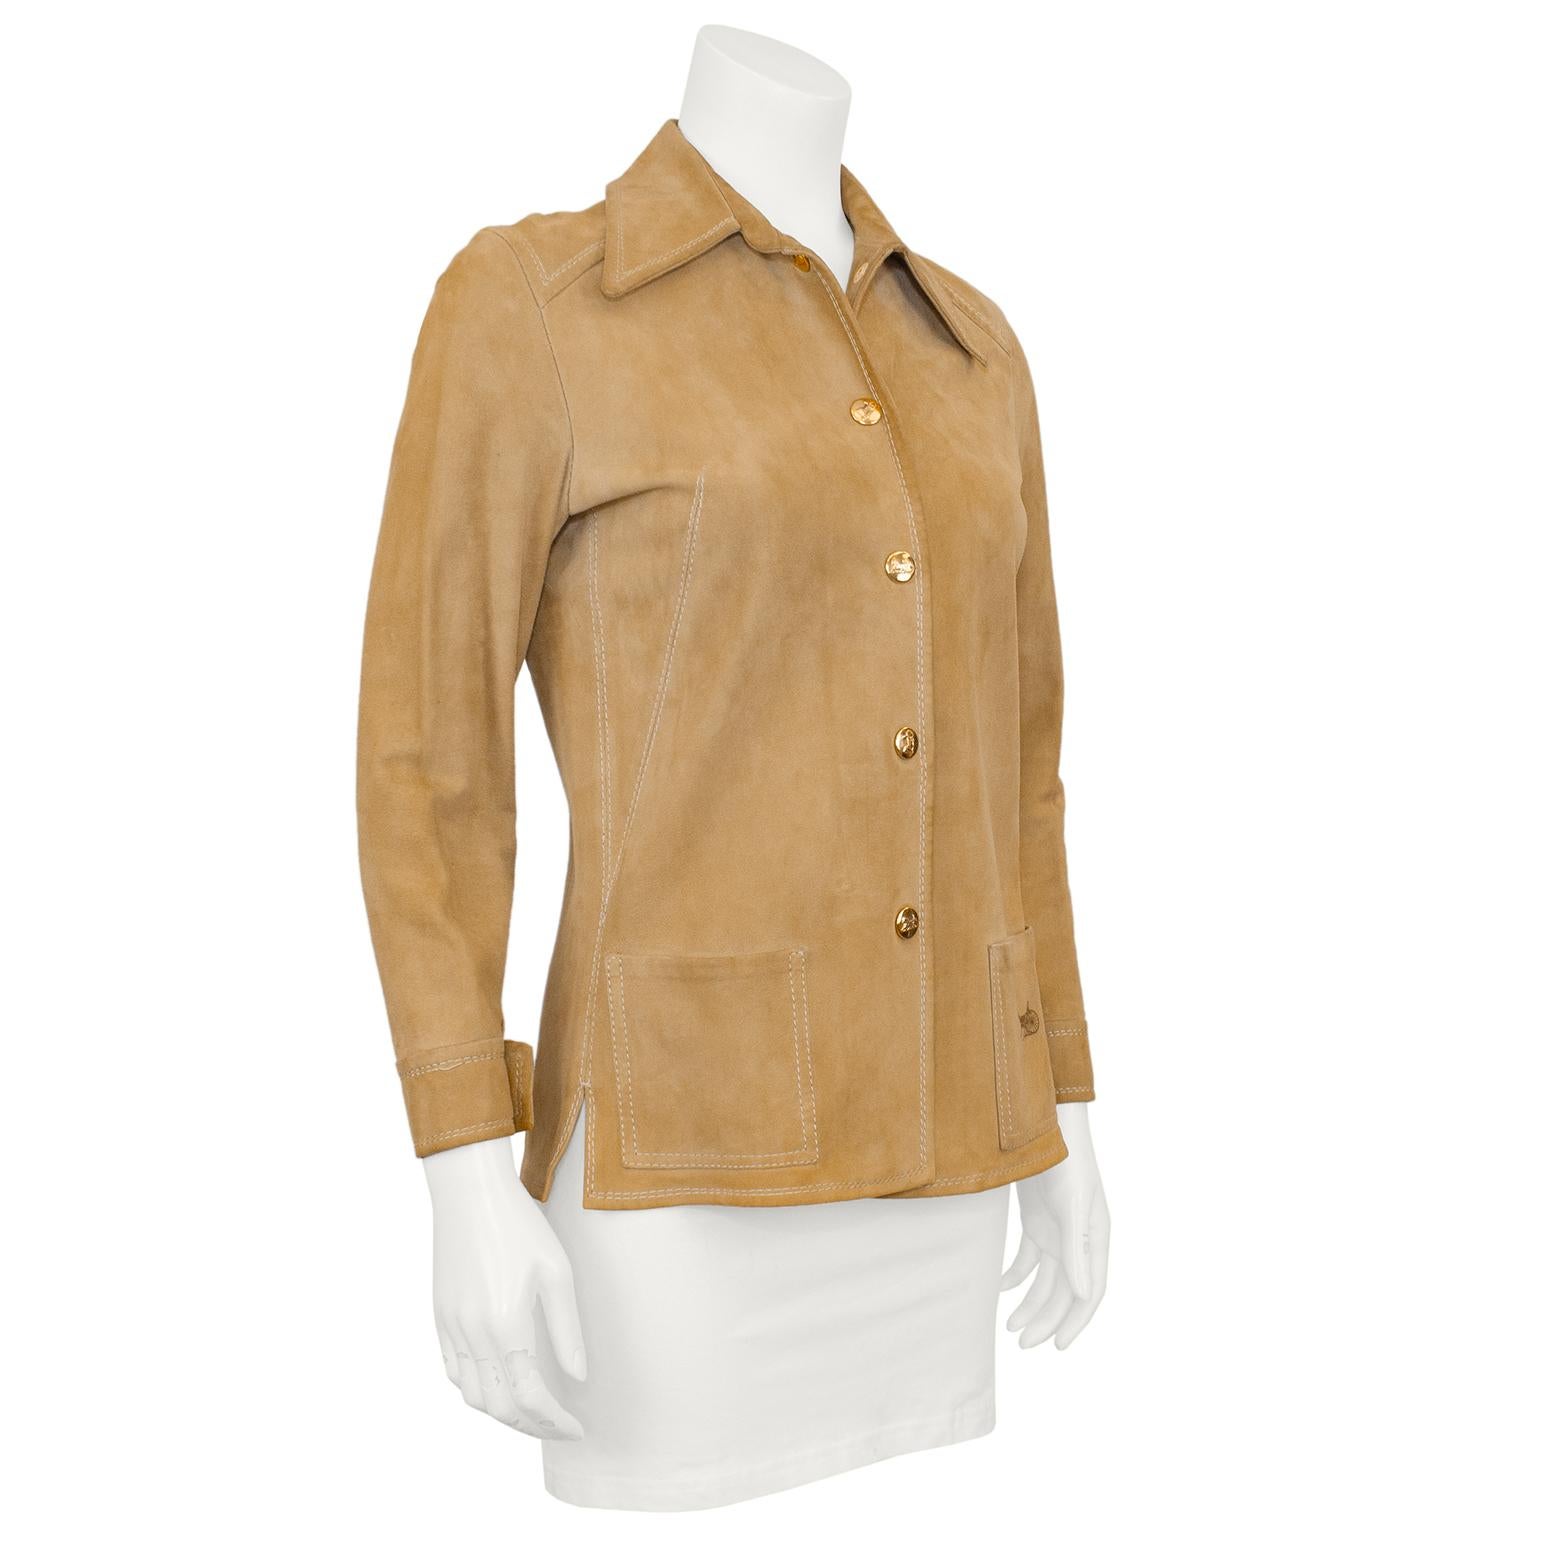 This is a quintessential 1970s piece! Celine tan suede lightweight jacket/shirt. Oversized very 70's collar with gold tone Celine logo buttons and white top stitching throughout. Patch pockets at hips with small slits at side seams. Left pocket when